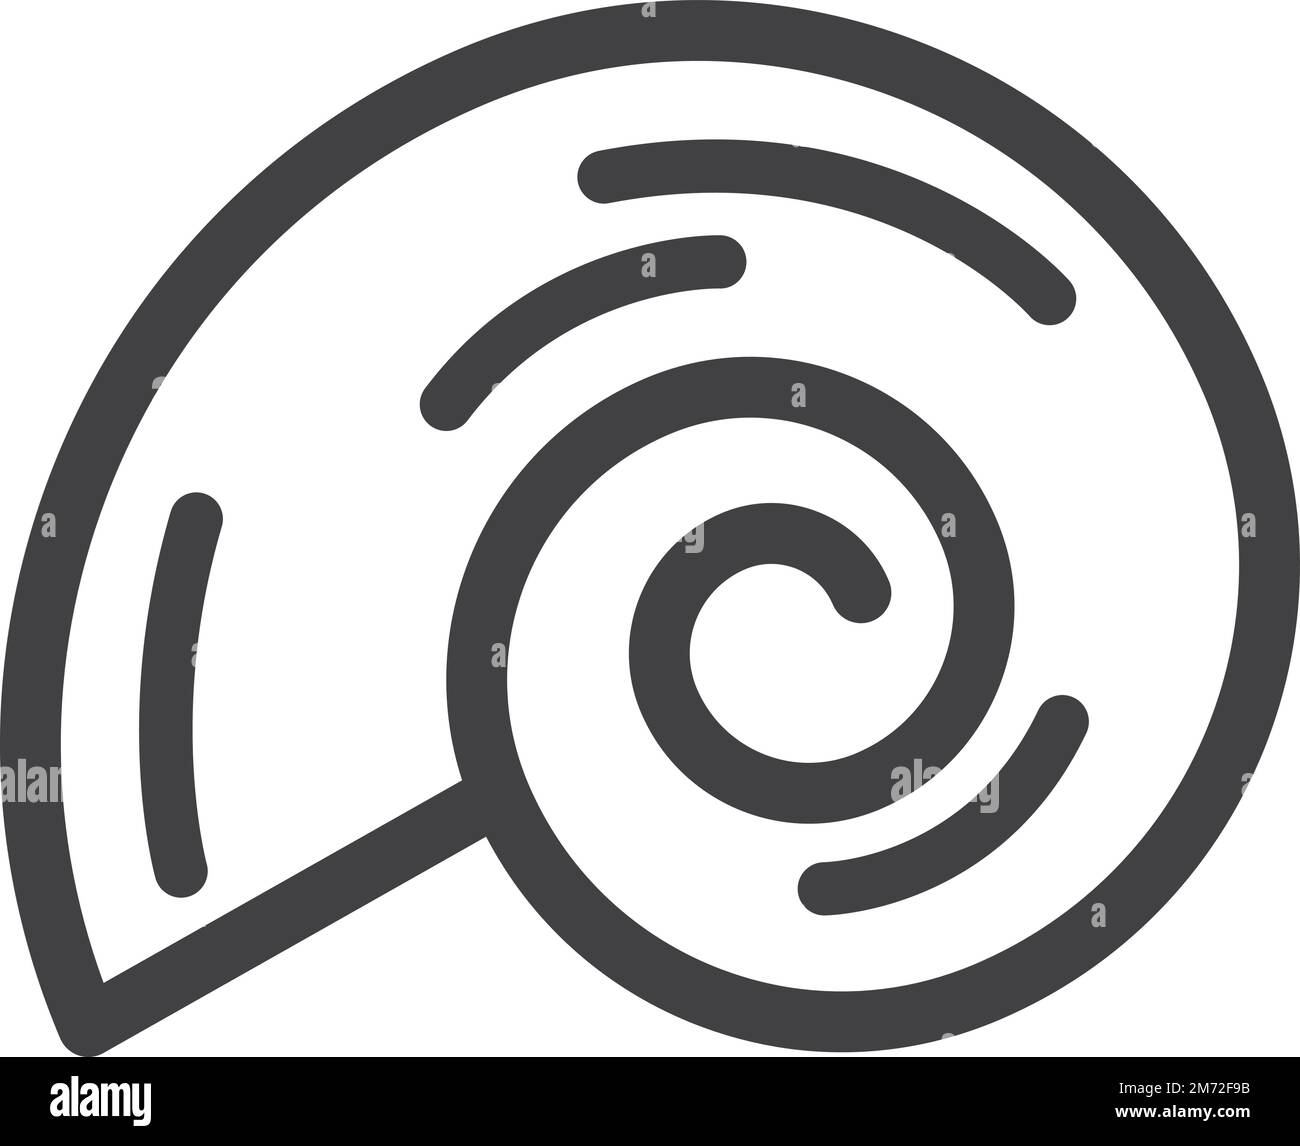 nautilus shell illustration in minimal style isolated on background Stock Vector